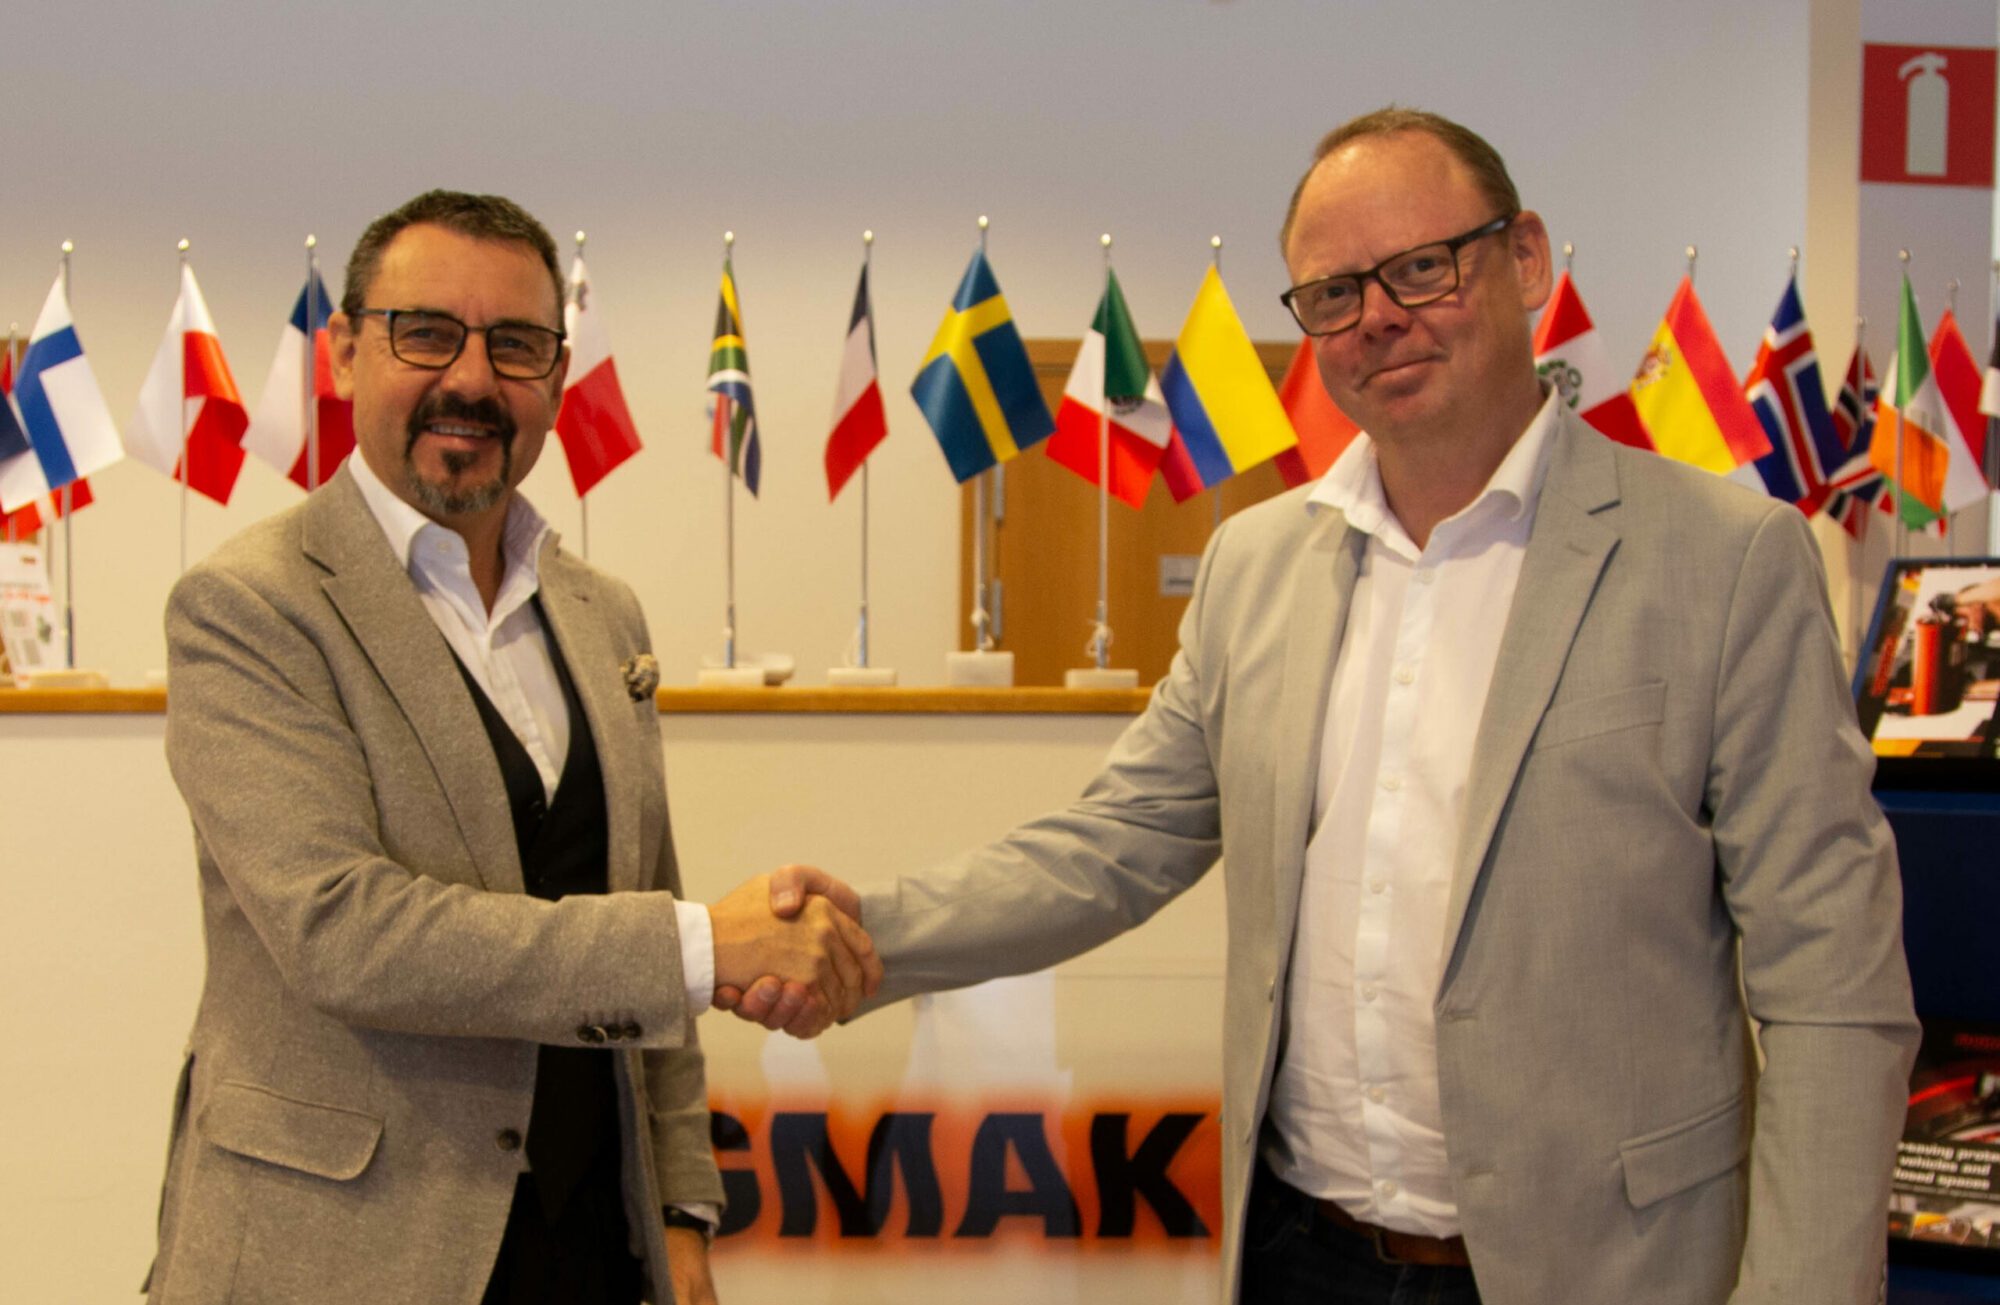 Lars Fredin from Fogmaker's main owner, Dacke Industri, and Lars Alrutz, new CEO from January 1, 2023.